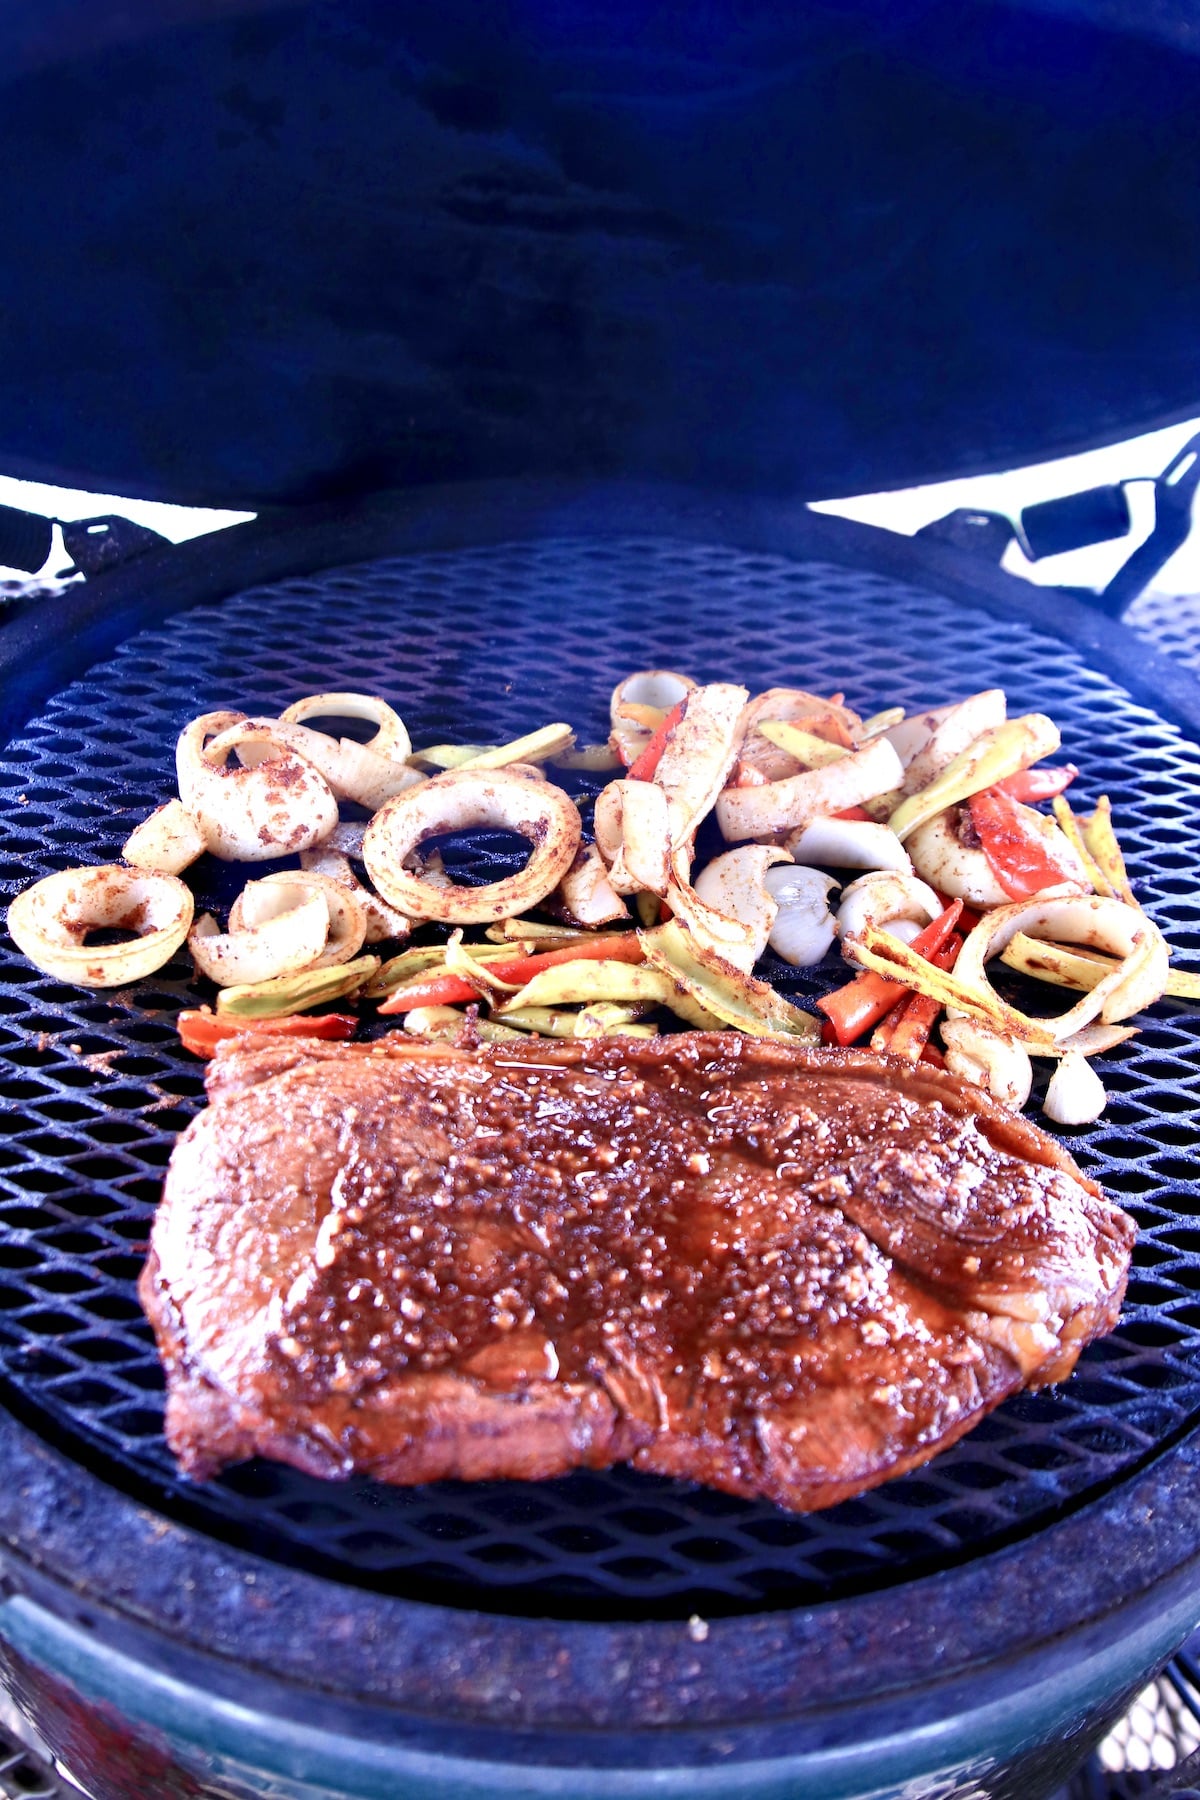 Grilled Sirloin steak, peppers and onions.